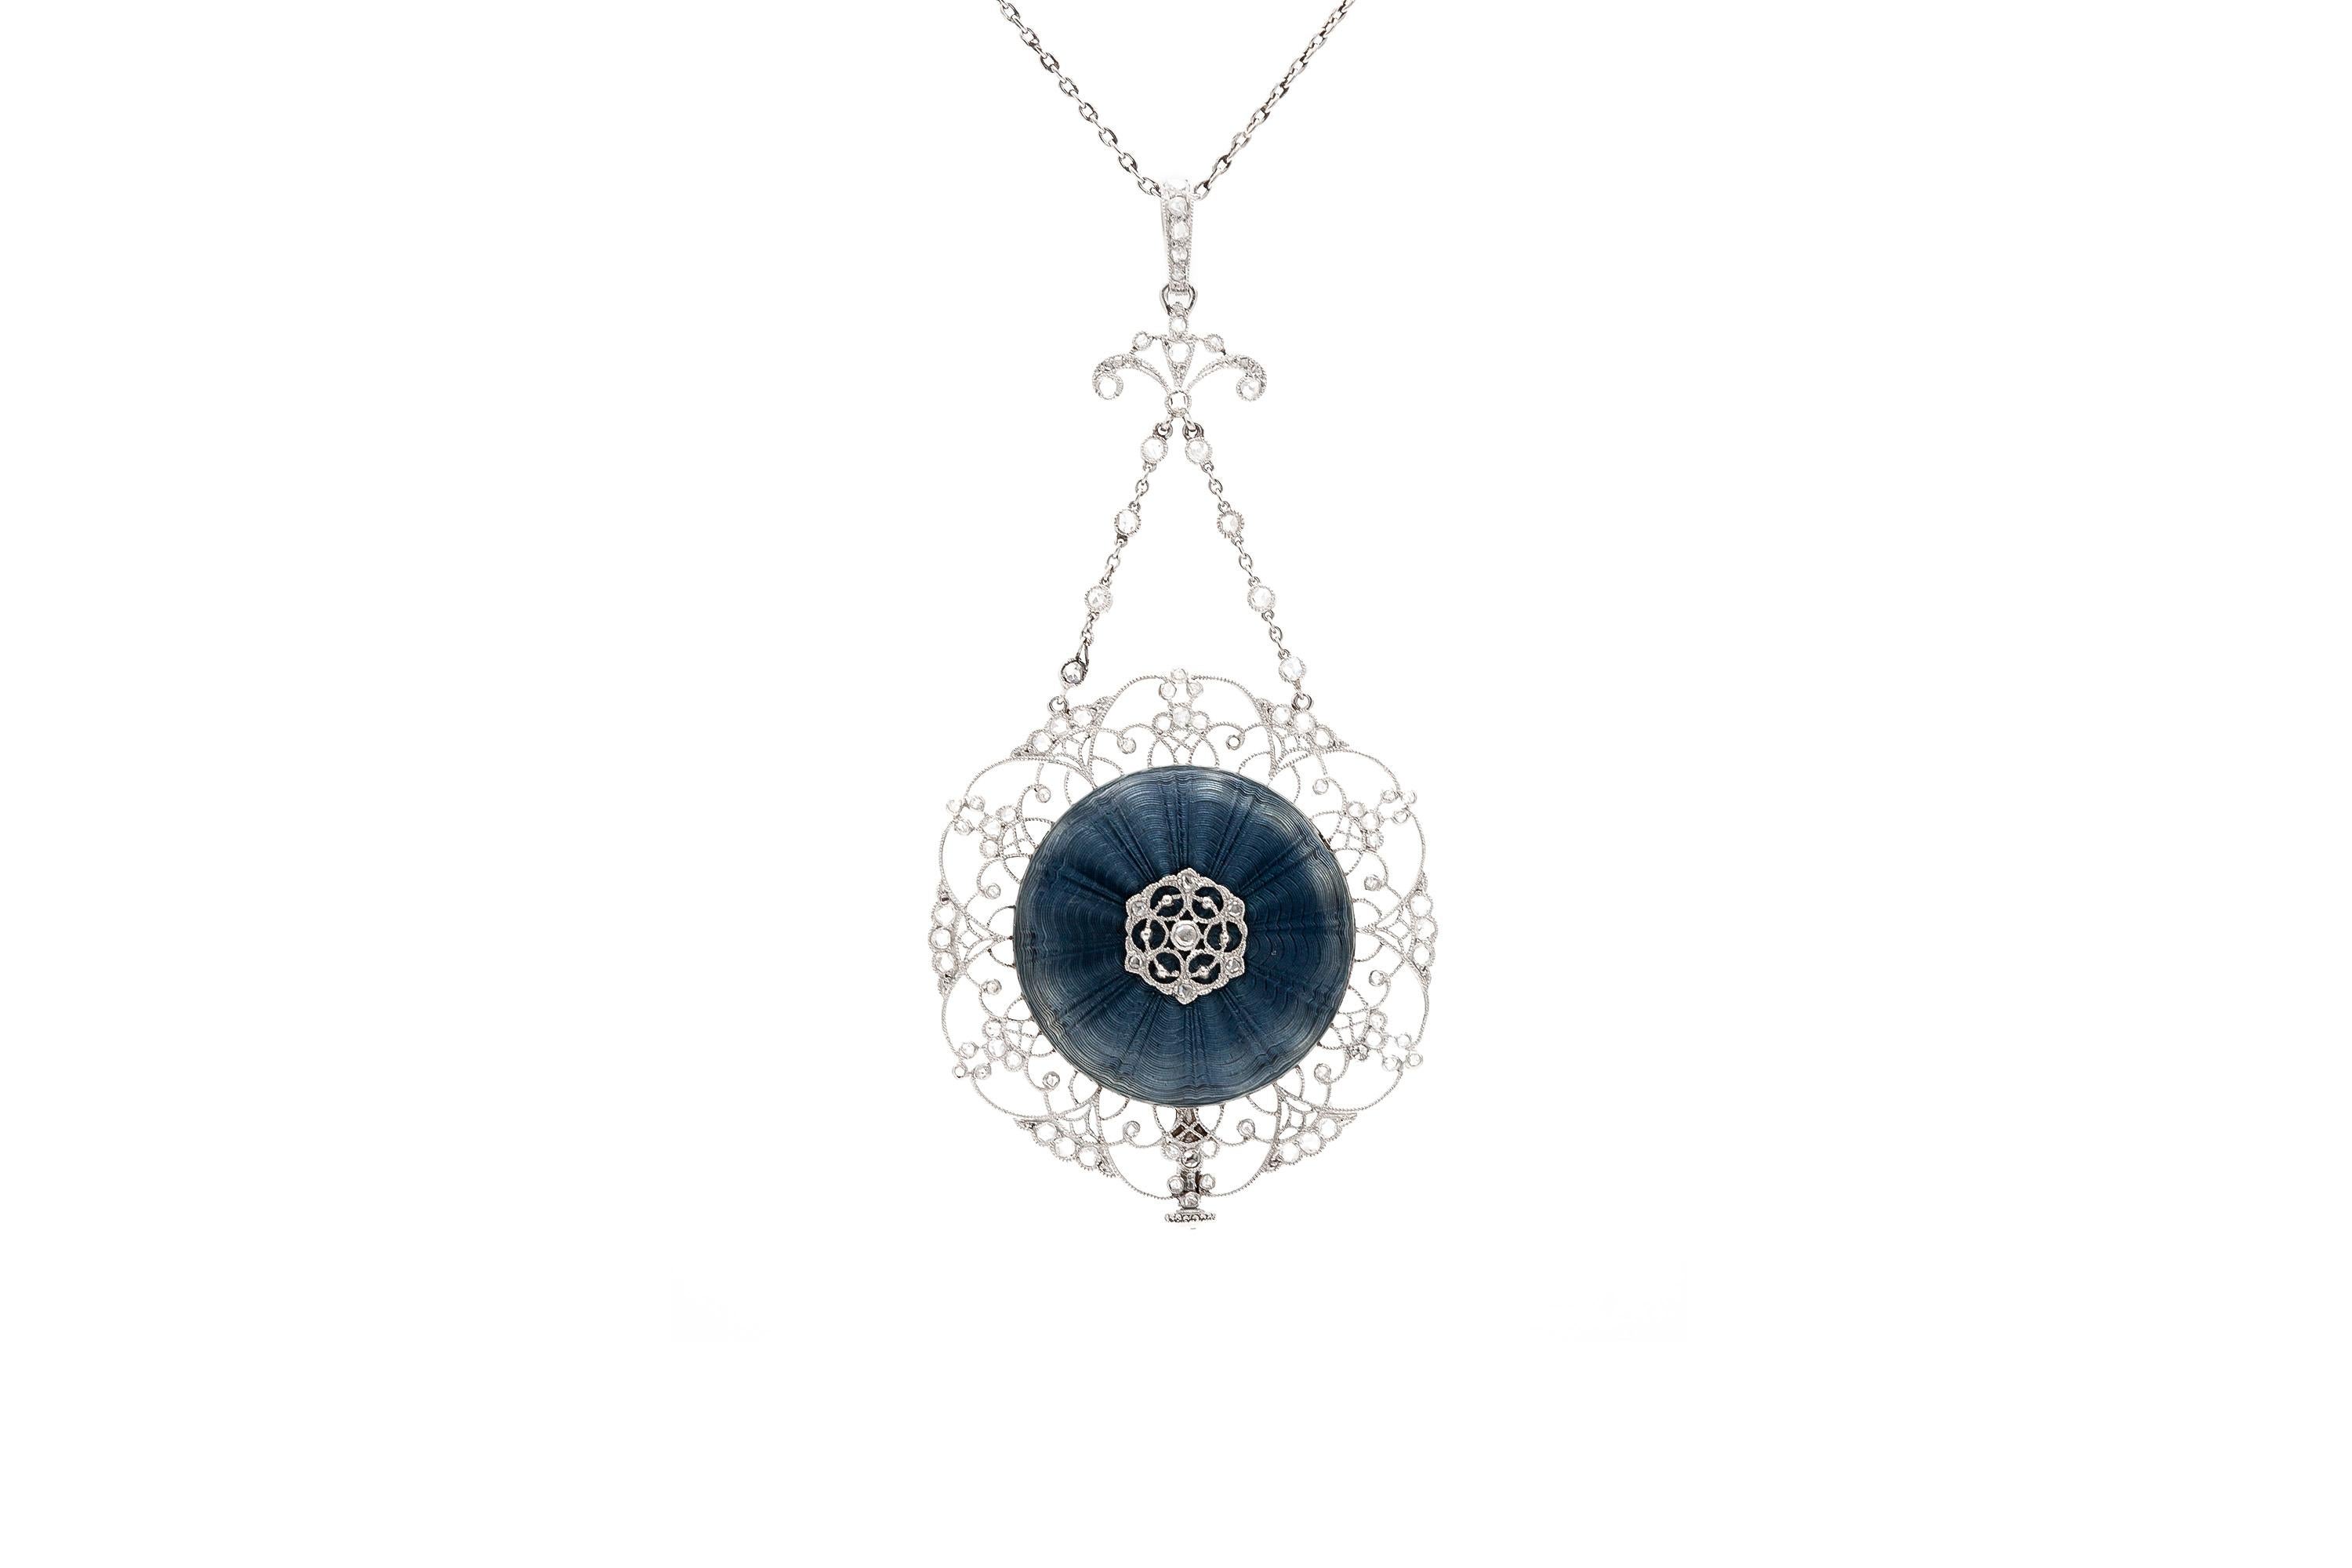 Edwardian Pendant Watch Necklace with Blue Enamel and Diamonds In Good Condition For Sale In New York, NY